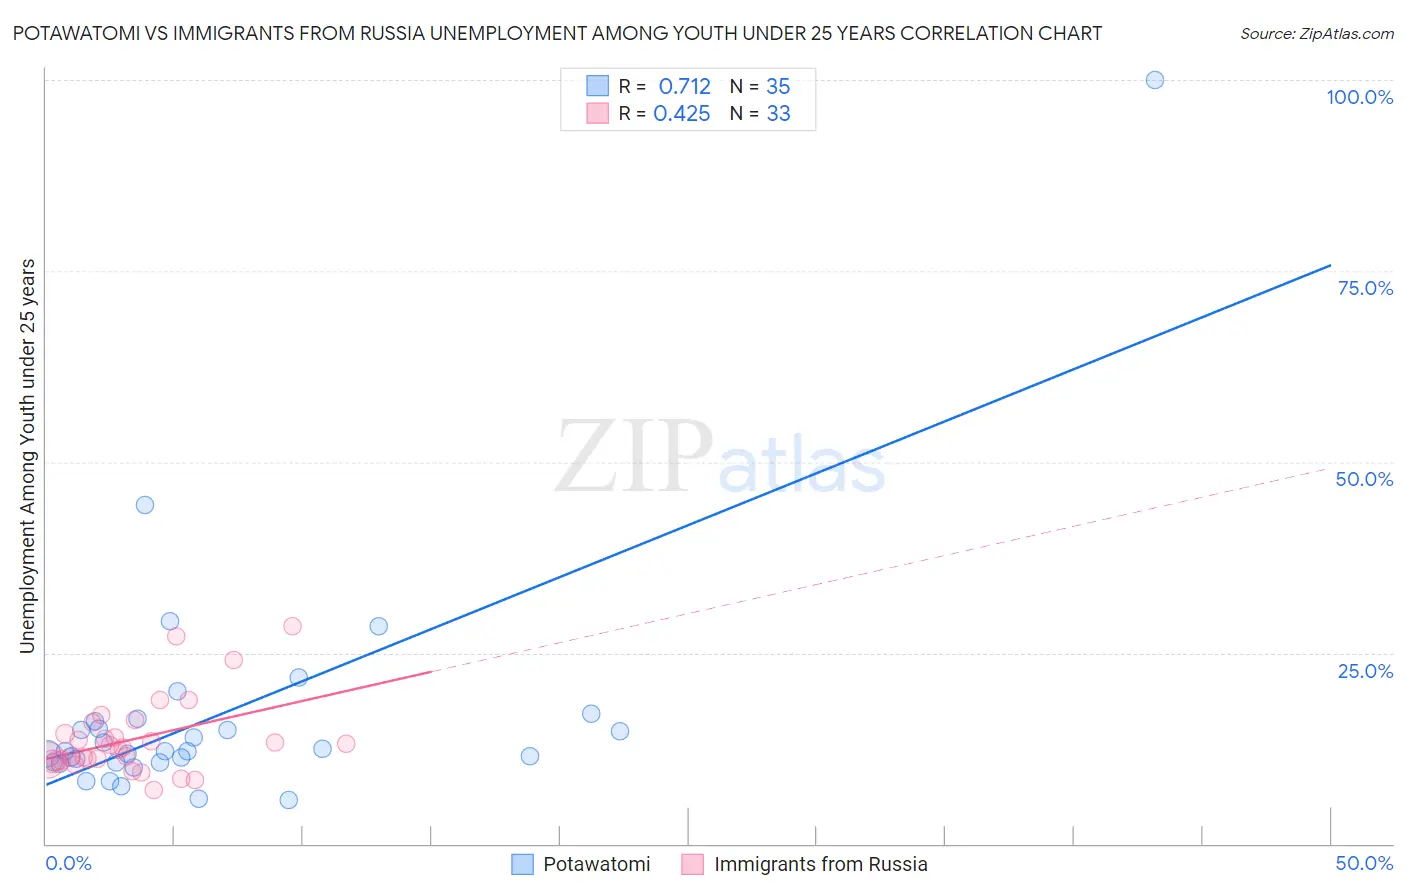 Potawatomi vs Immigrants from Russia Unemployment Among Youth under 25 years